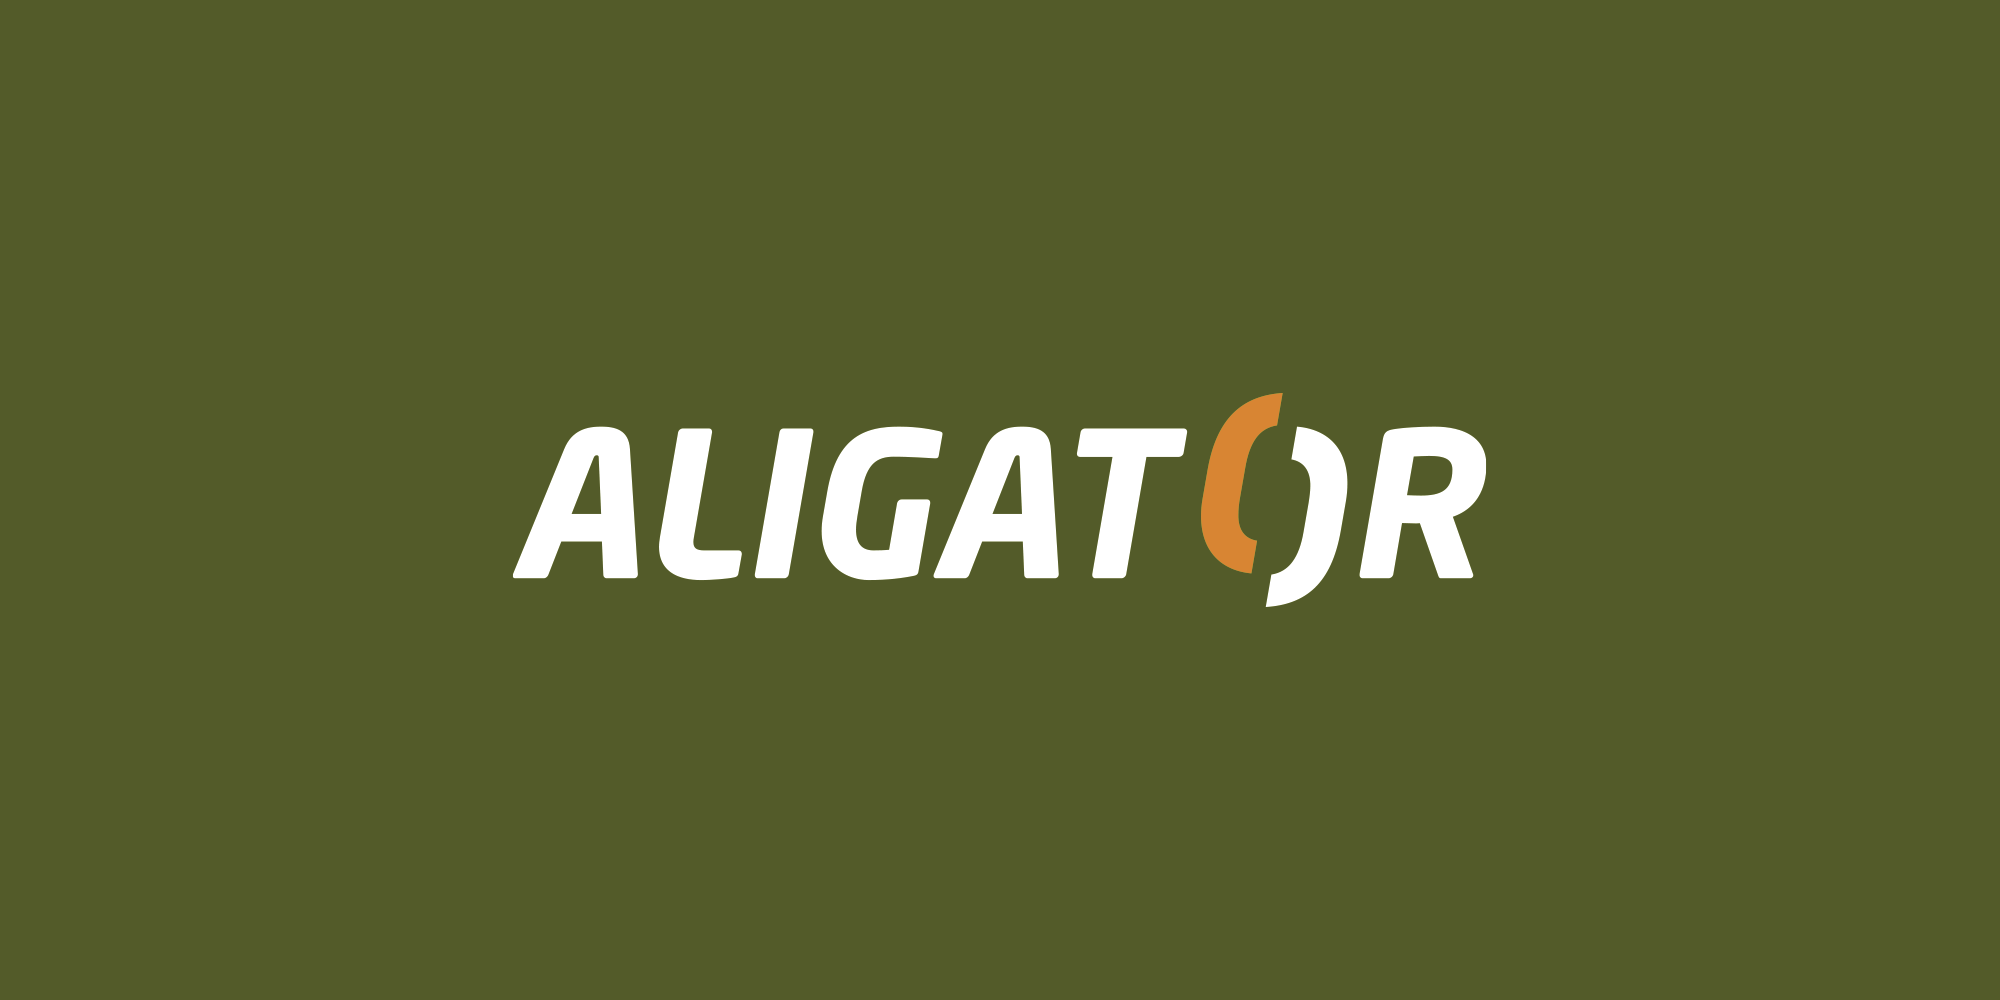 [album/Products_Model_Product/1/aligator-ci_3.png]